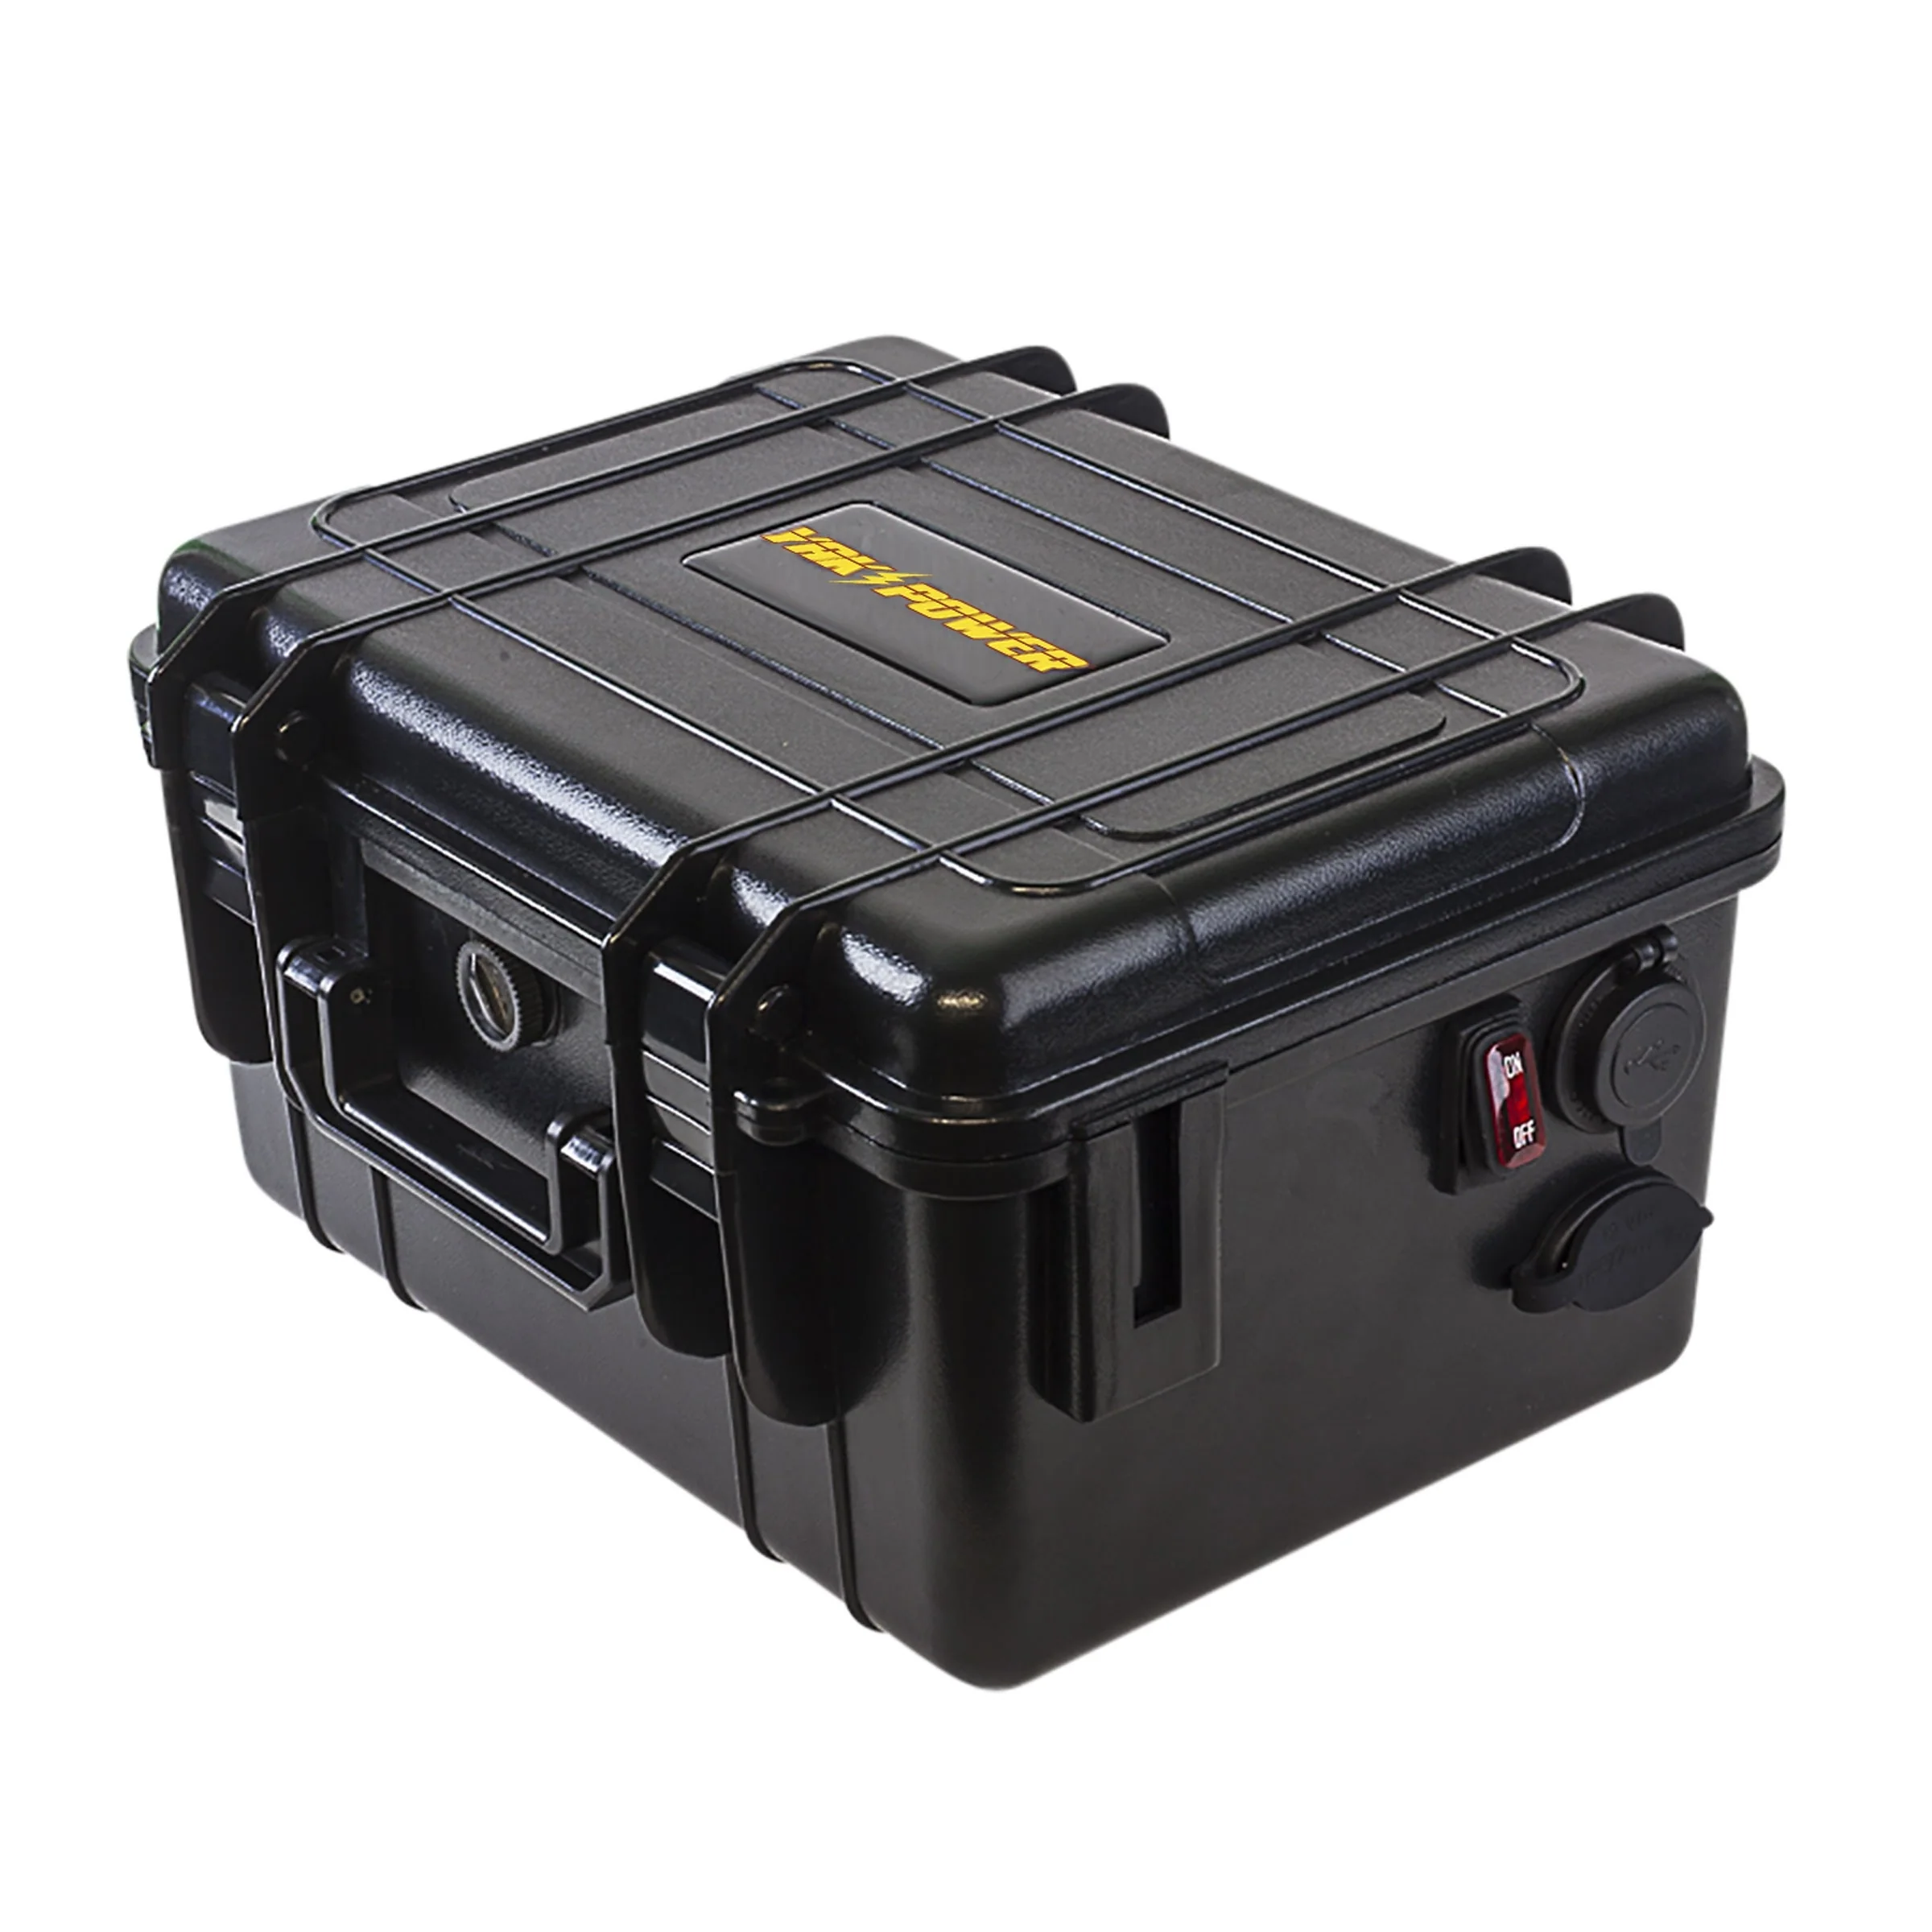 YP-BBK Power Pack Battery Box Questions & Answers